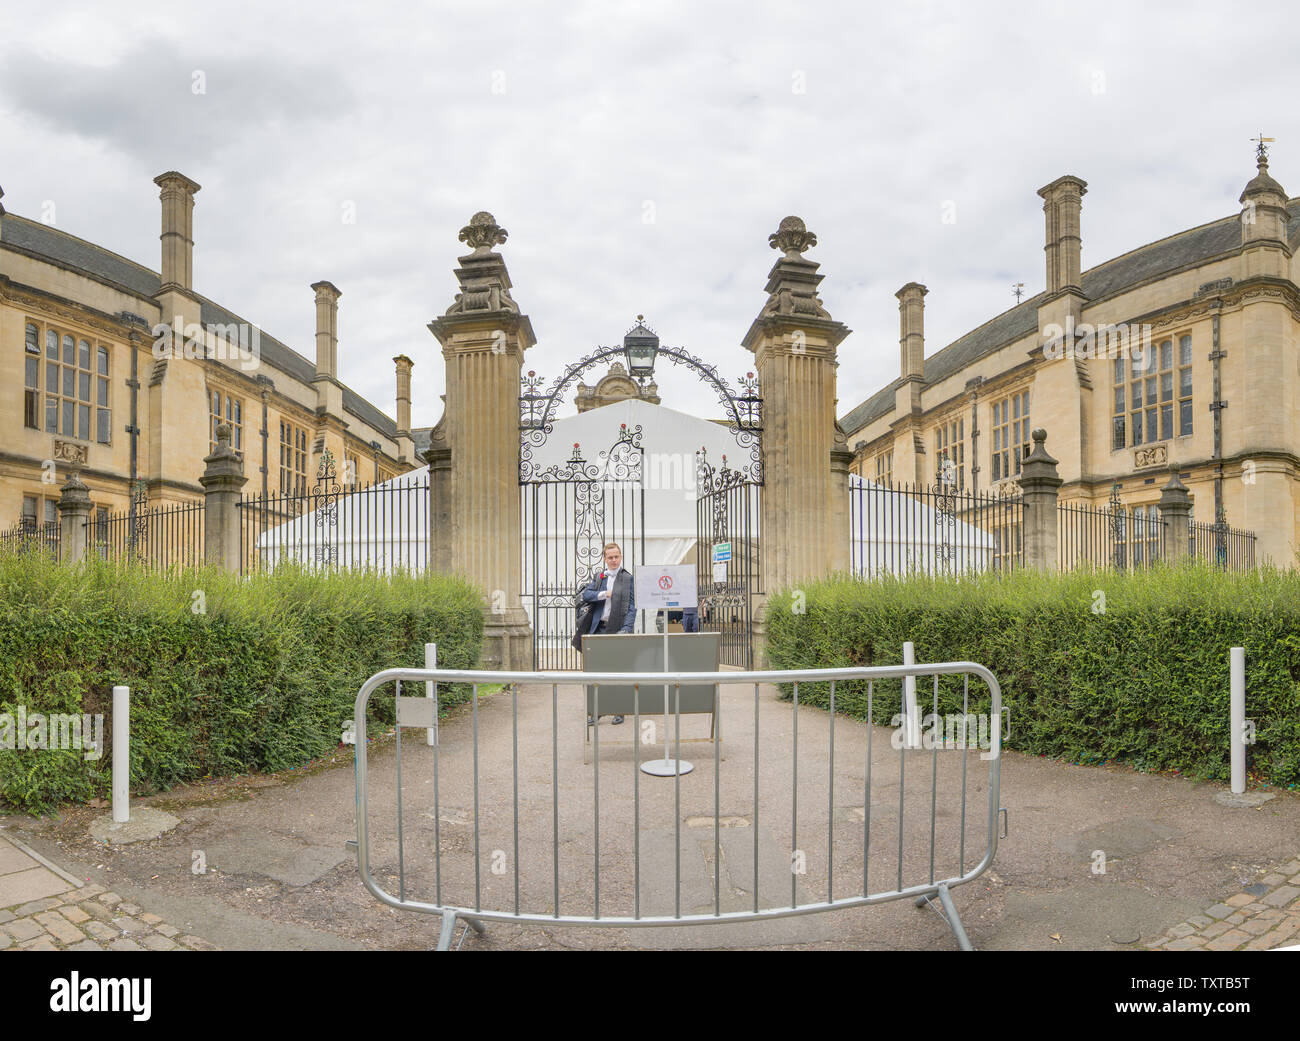 After sitting an exam, a student leaves the Examinations Schools building, Oxford university, along Merton Street. Stock Photo